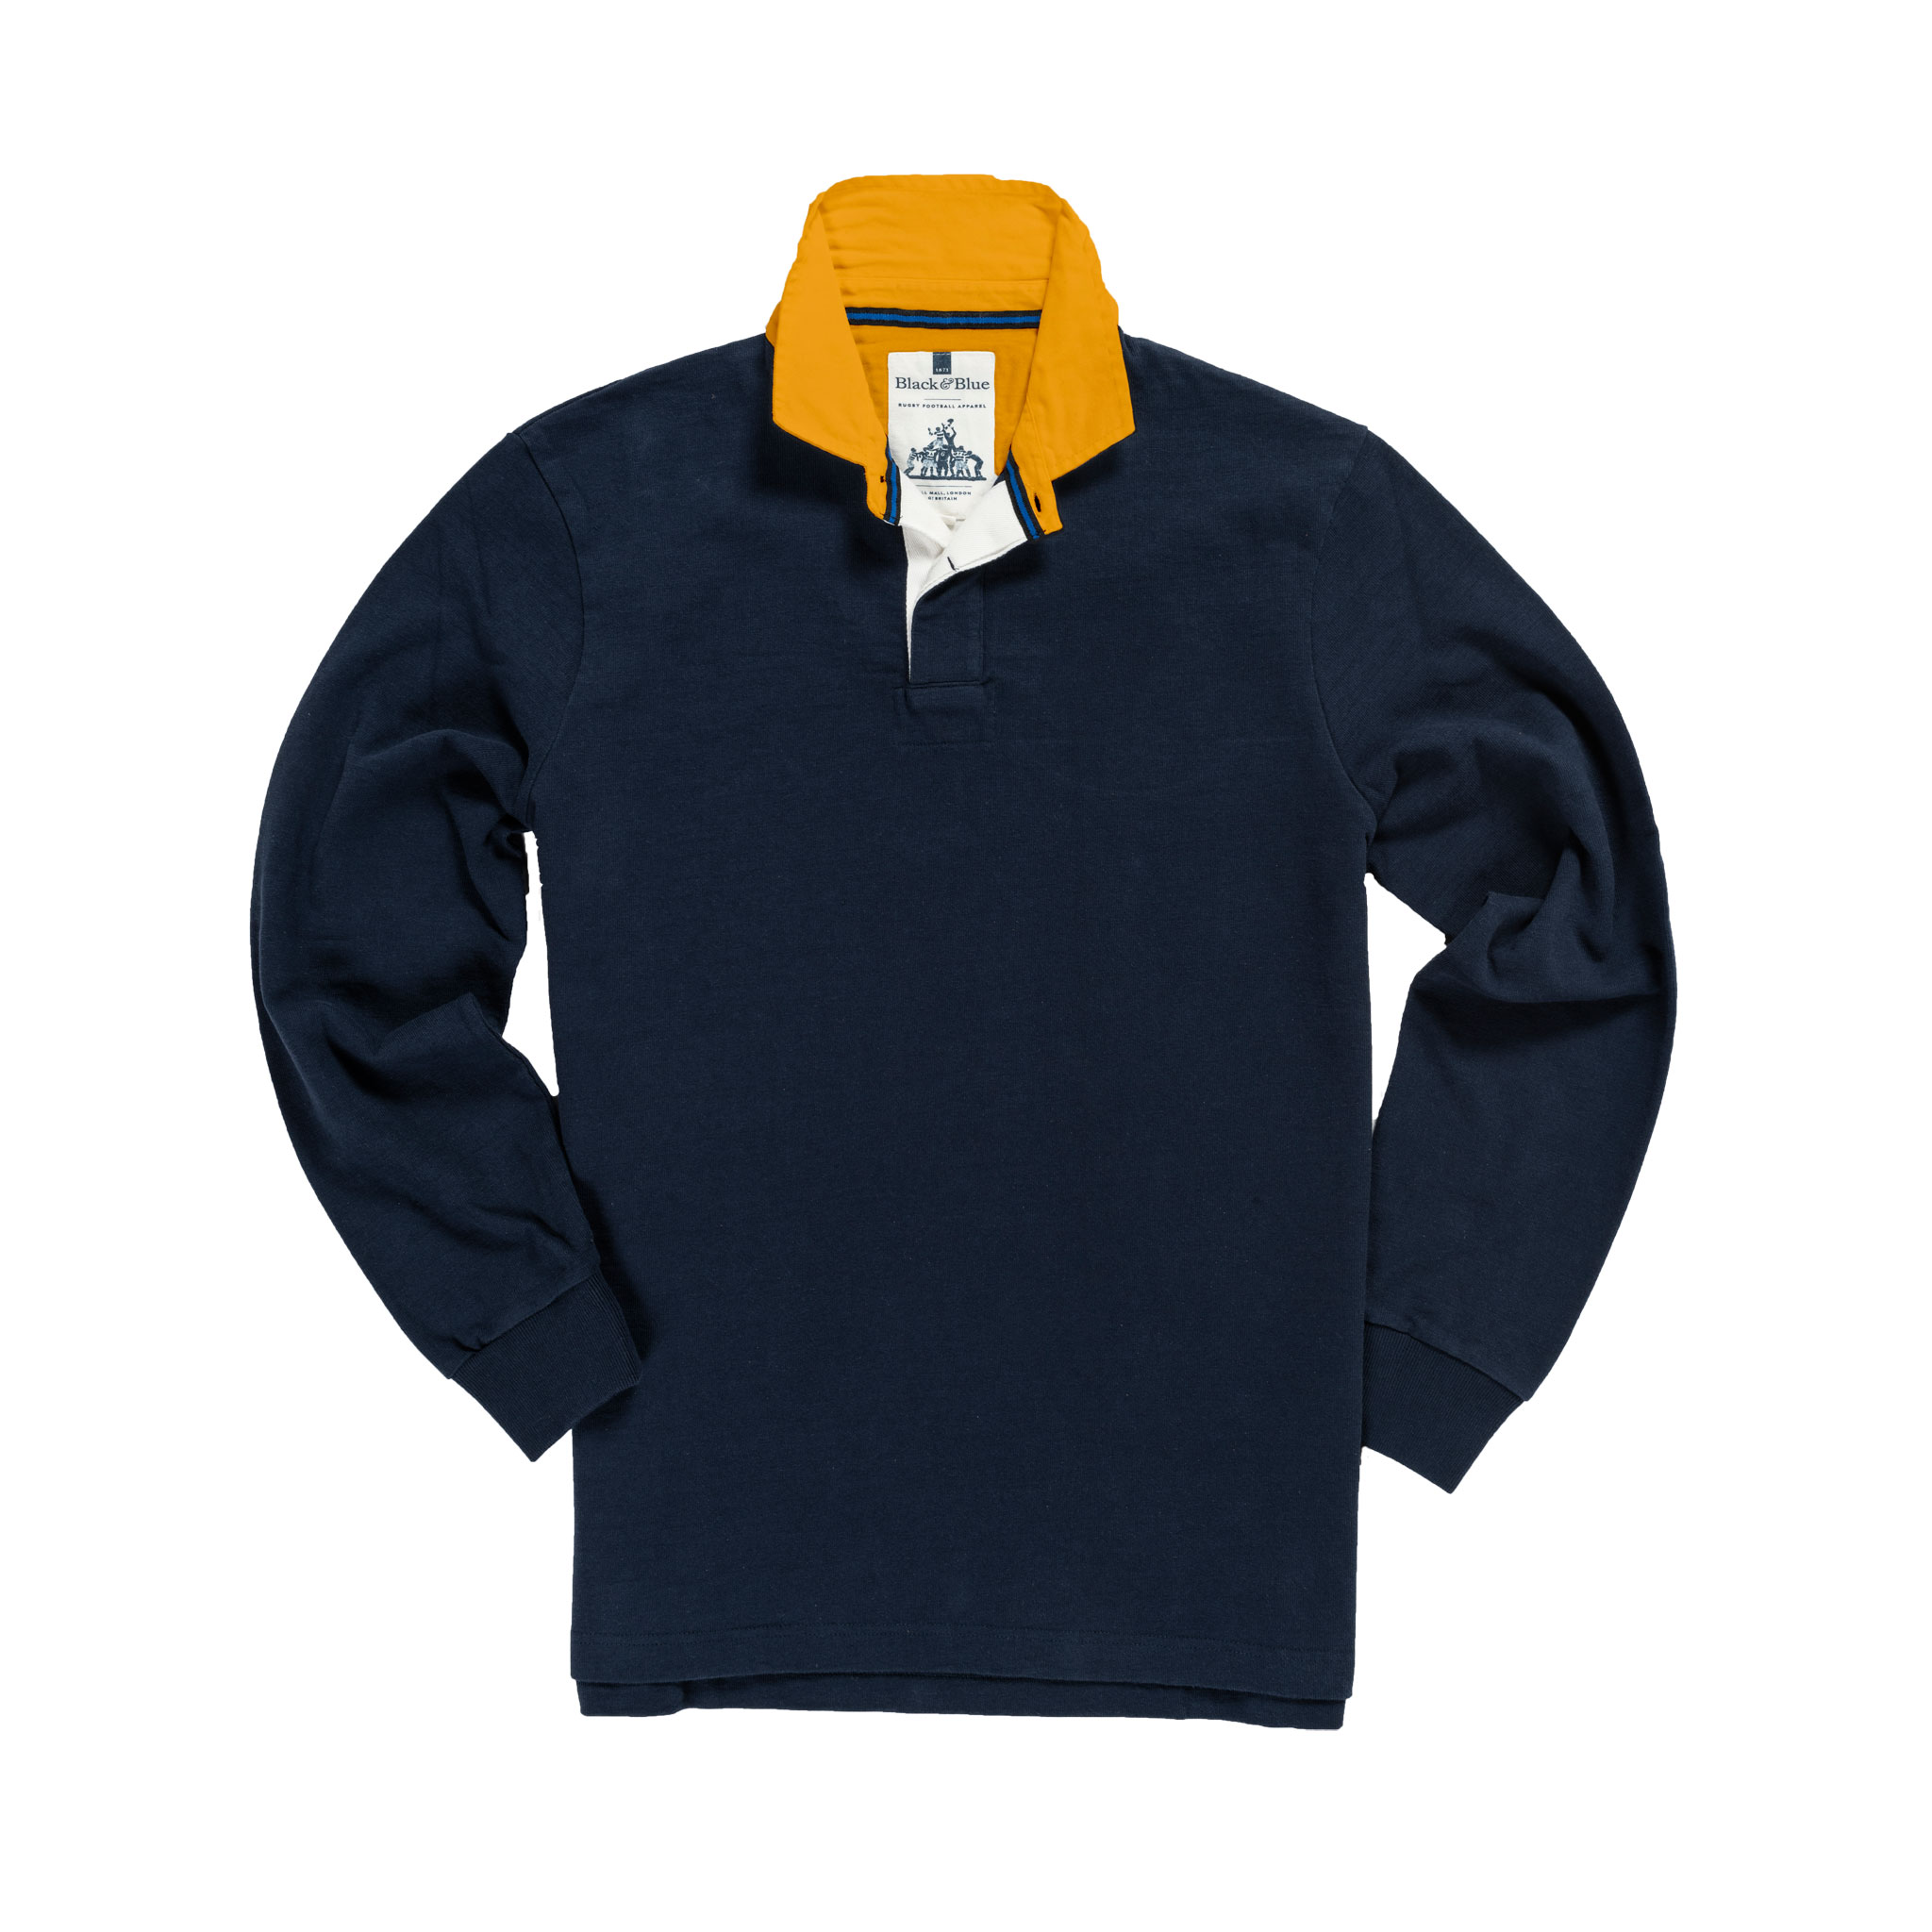 Classic Navy With Gold Collar 1871 Vintage Rugby Shirt